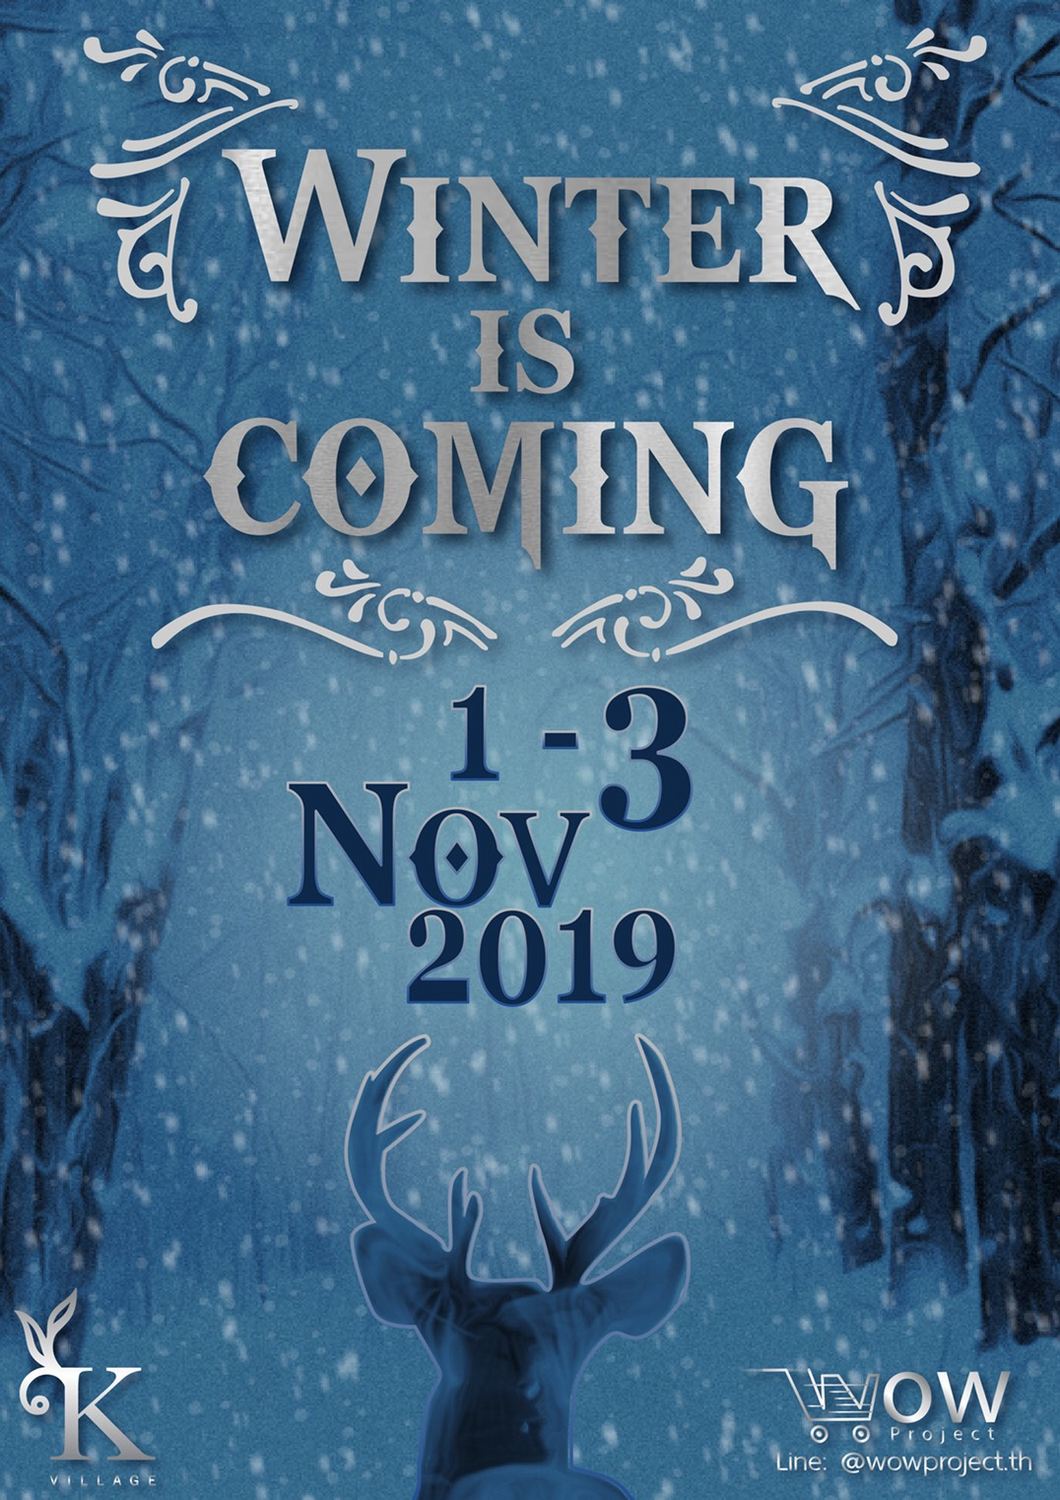 WINTERS IS COMING